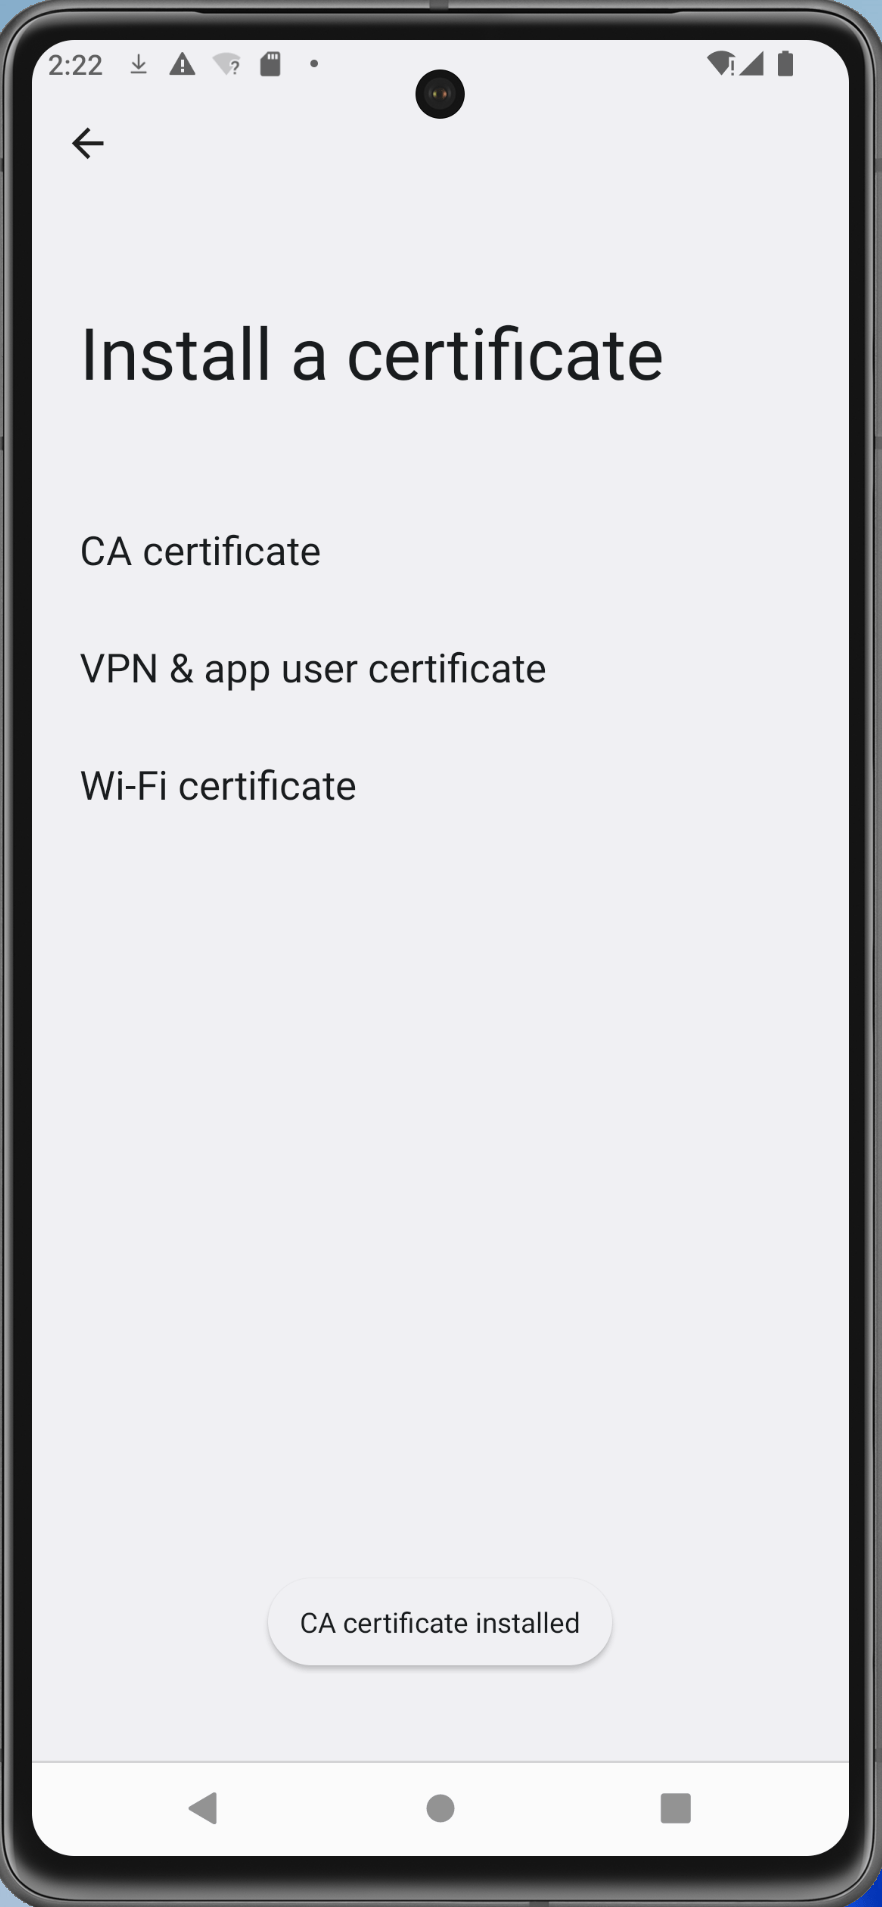 Android Virtual Device screenshot with the final step to install a certificate